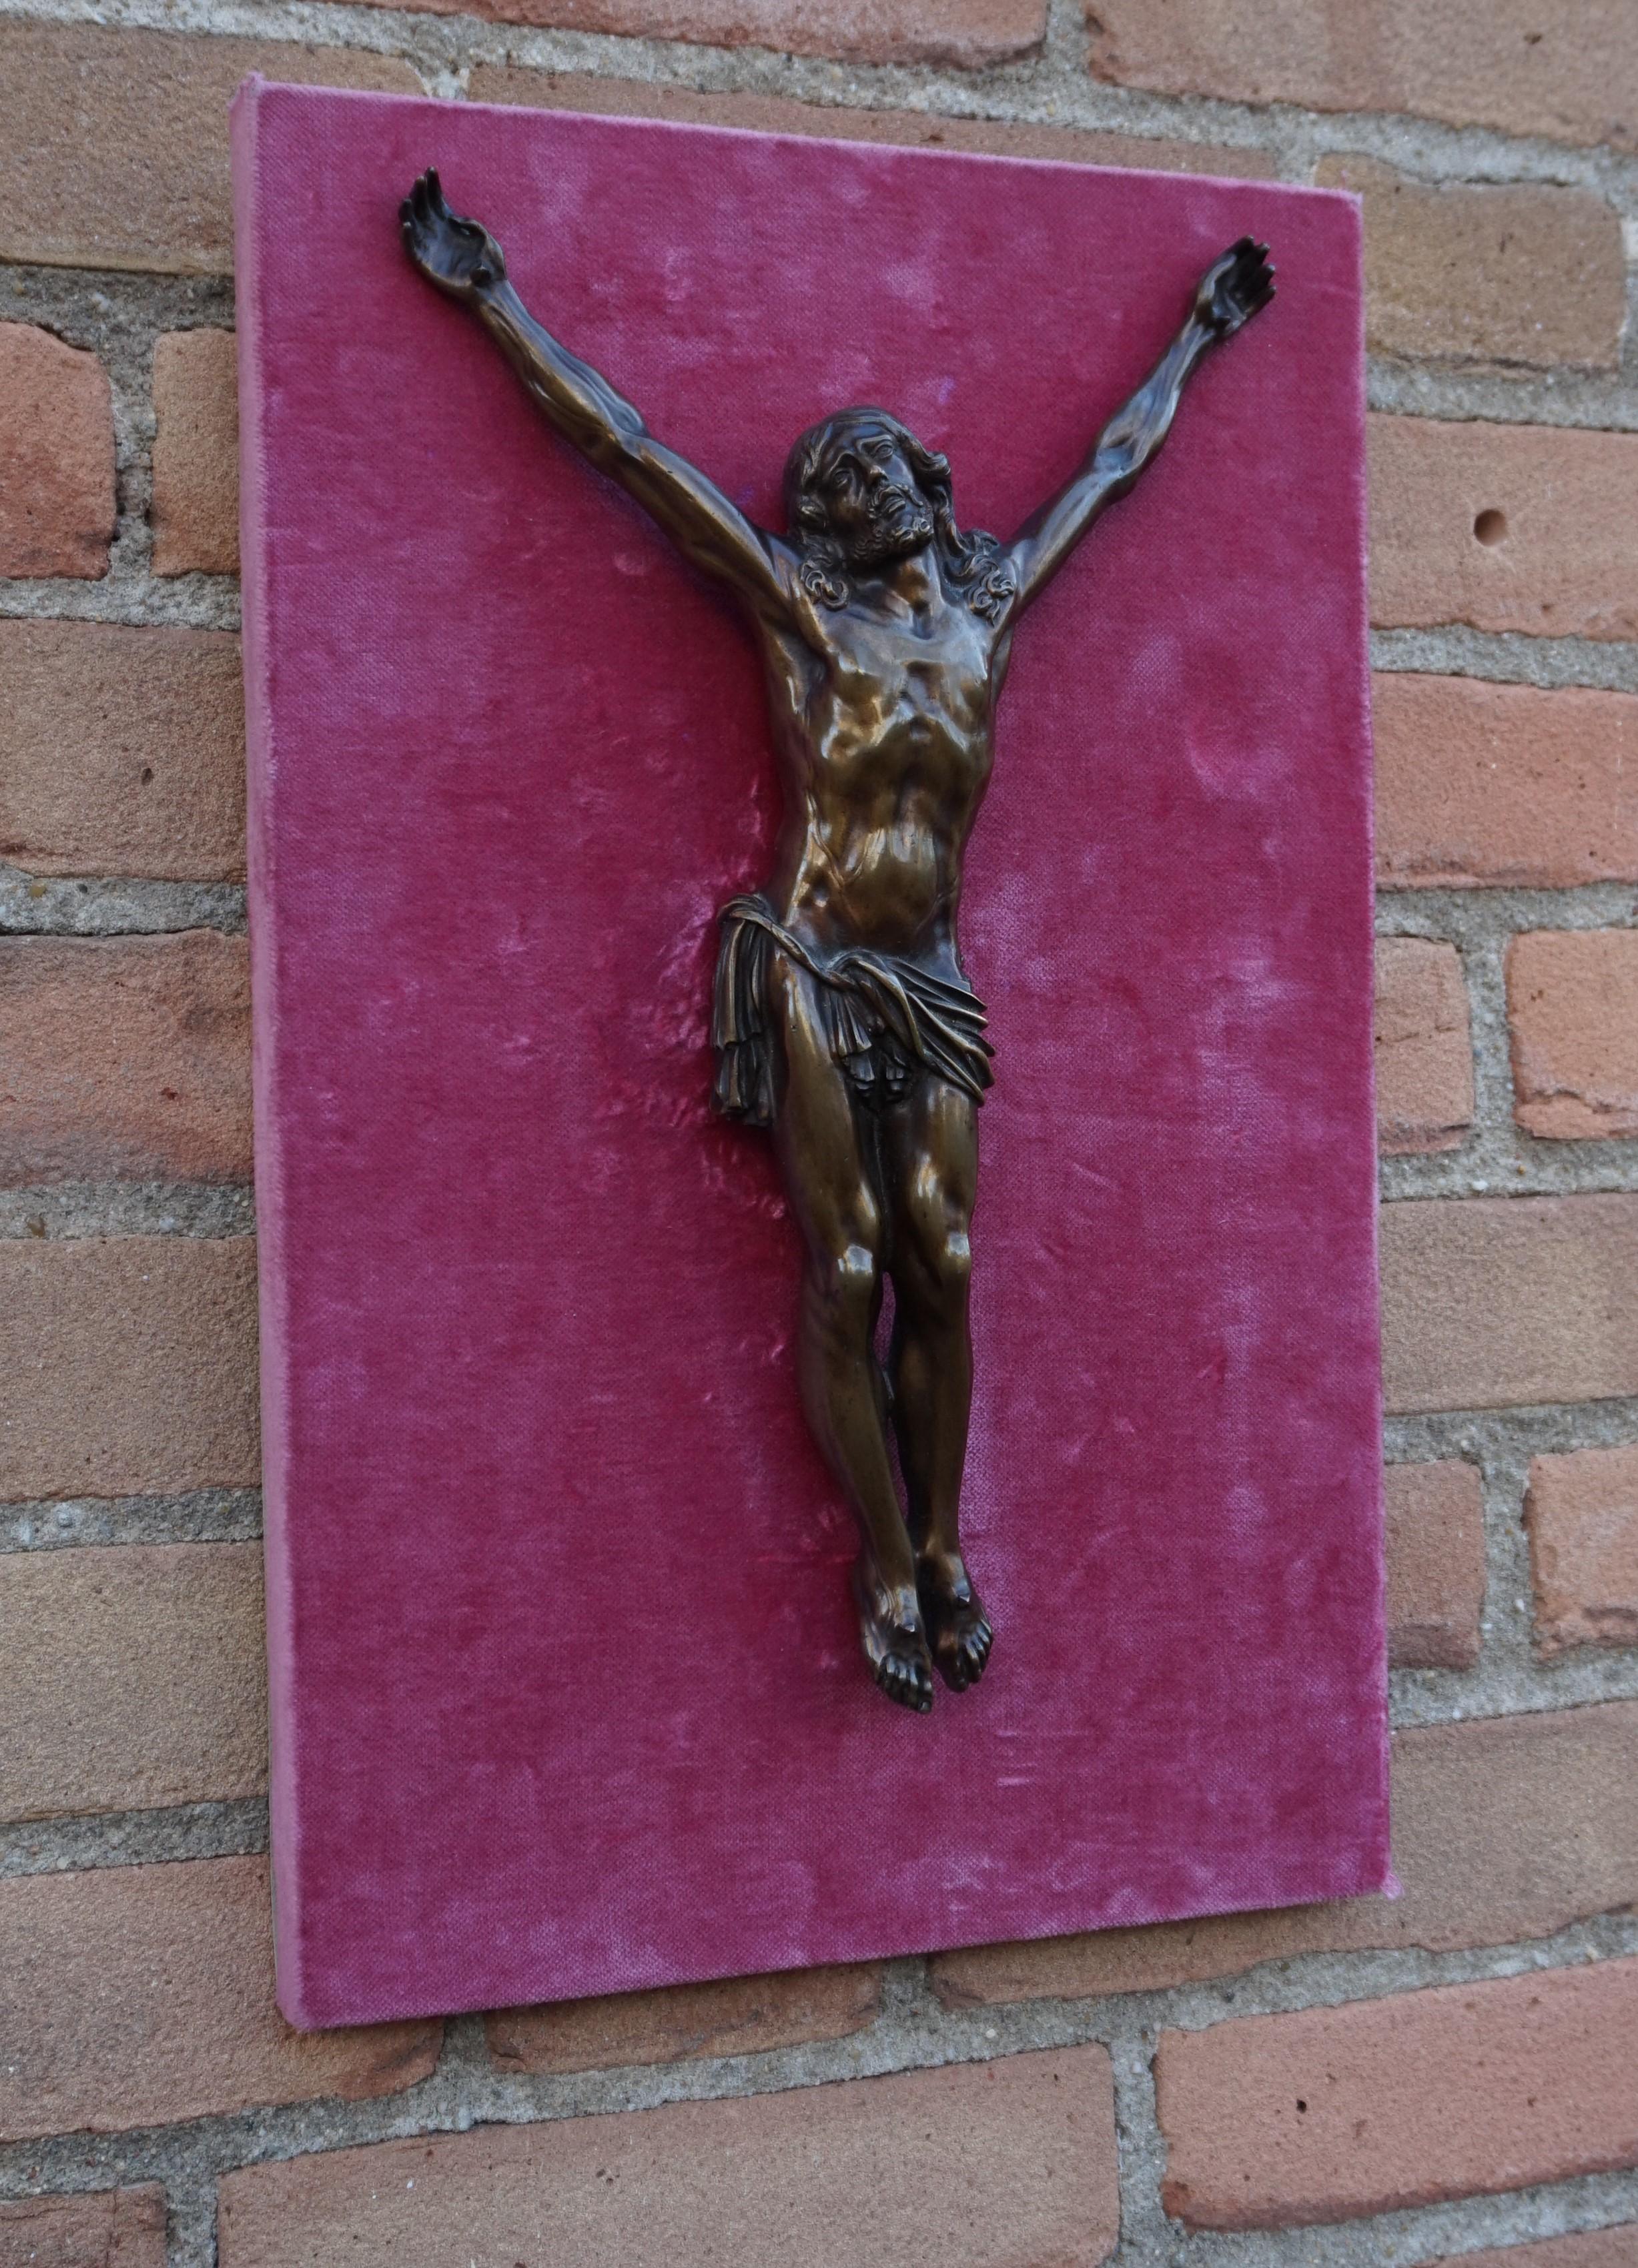 Amazing sculpture of Jesus on the cross.

This bronze sculpture of Christ is a powerful reminder of His agony and suffering on the cross. Much has changed in society since the life of Christ, but there are still many signs that we are far from being